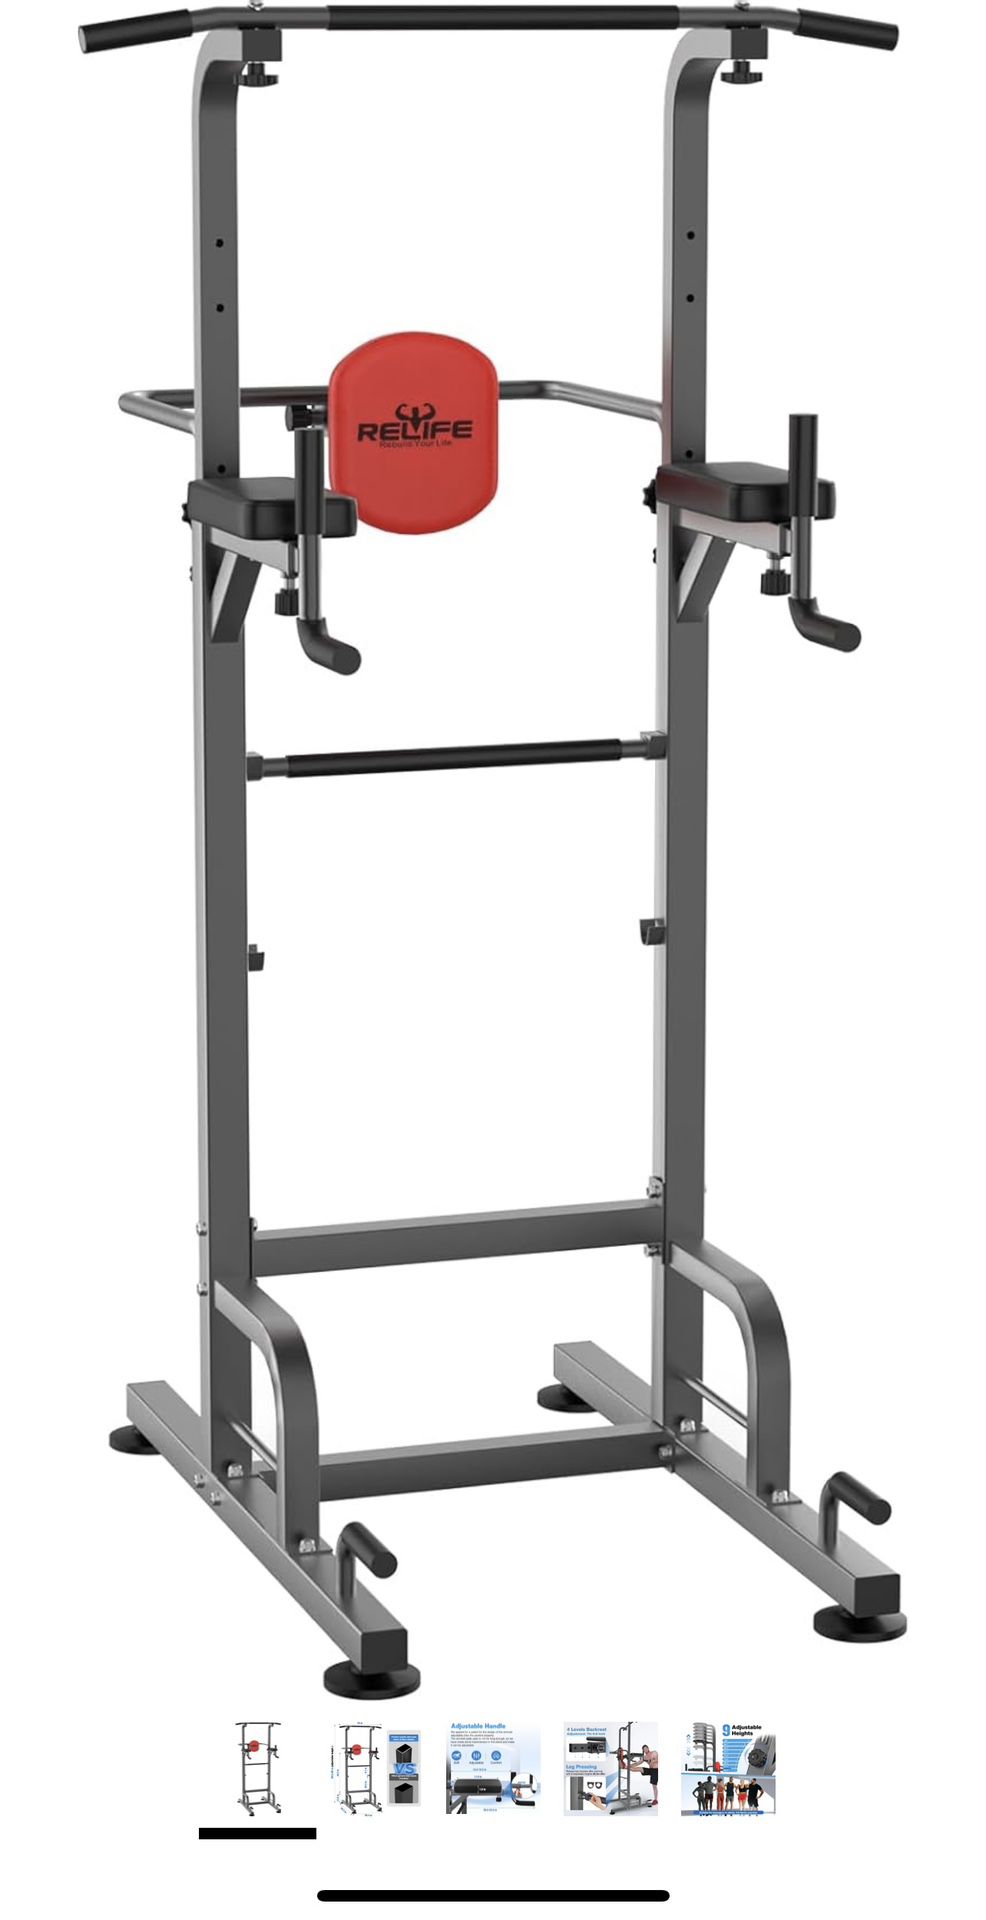 RELIFE REBUILD YOUR LIFE Power Tower Pull Up Bar Station Workout Dip Station for Home Gym Strength Training Fitness Equipment Newer Version,450LBS